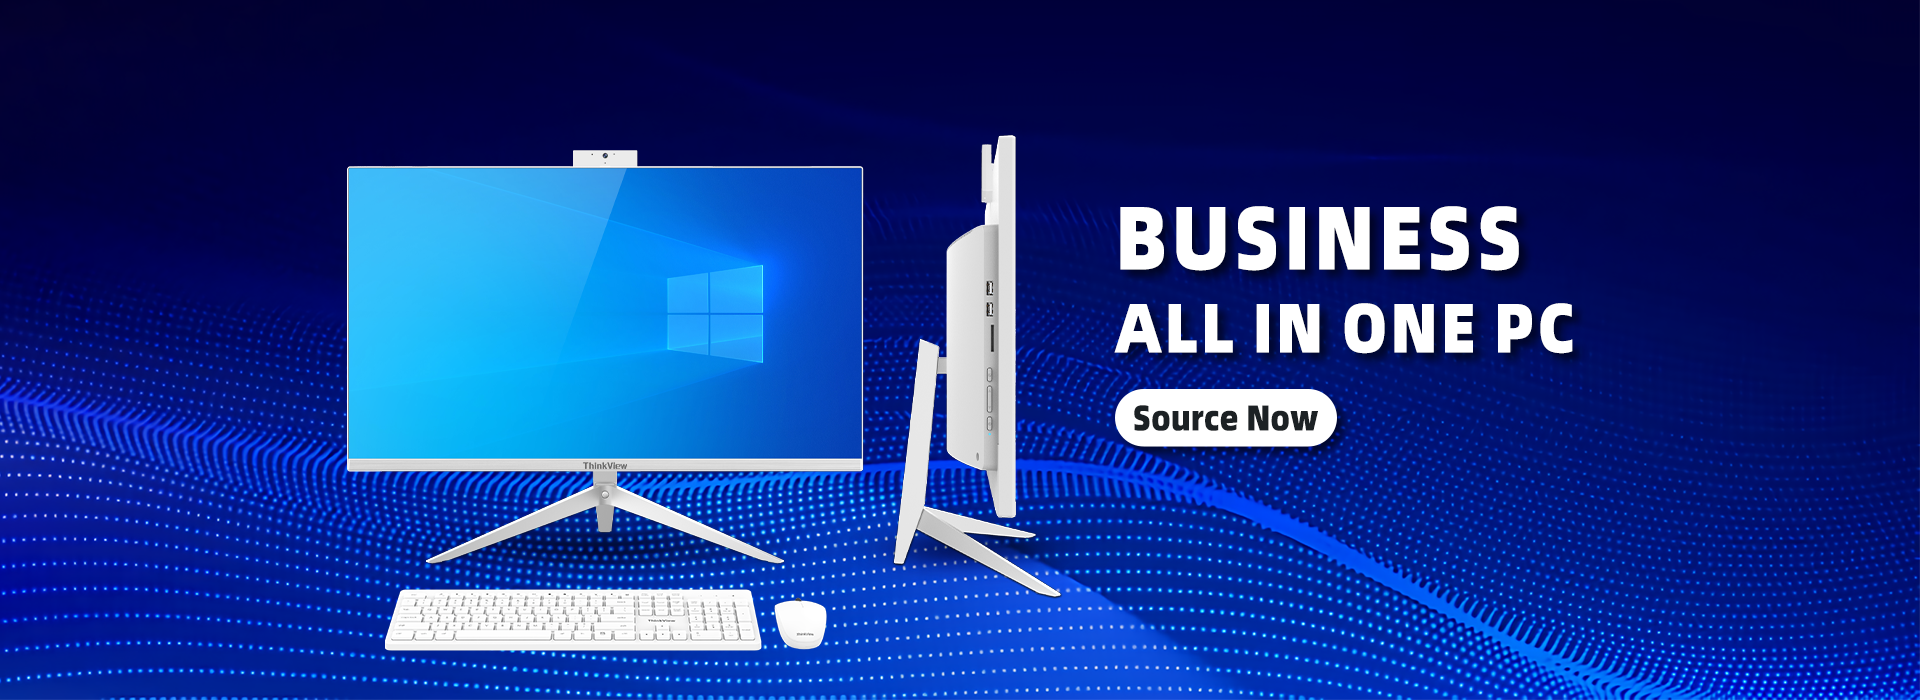 Business All in one PC